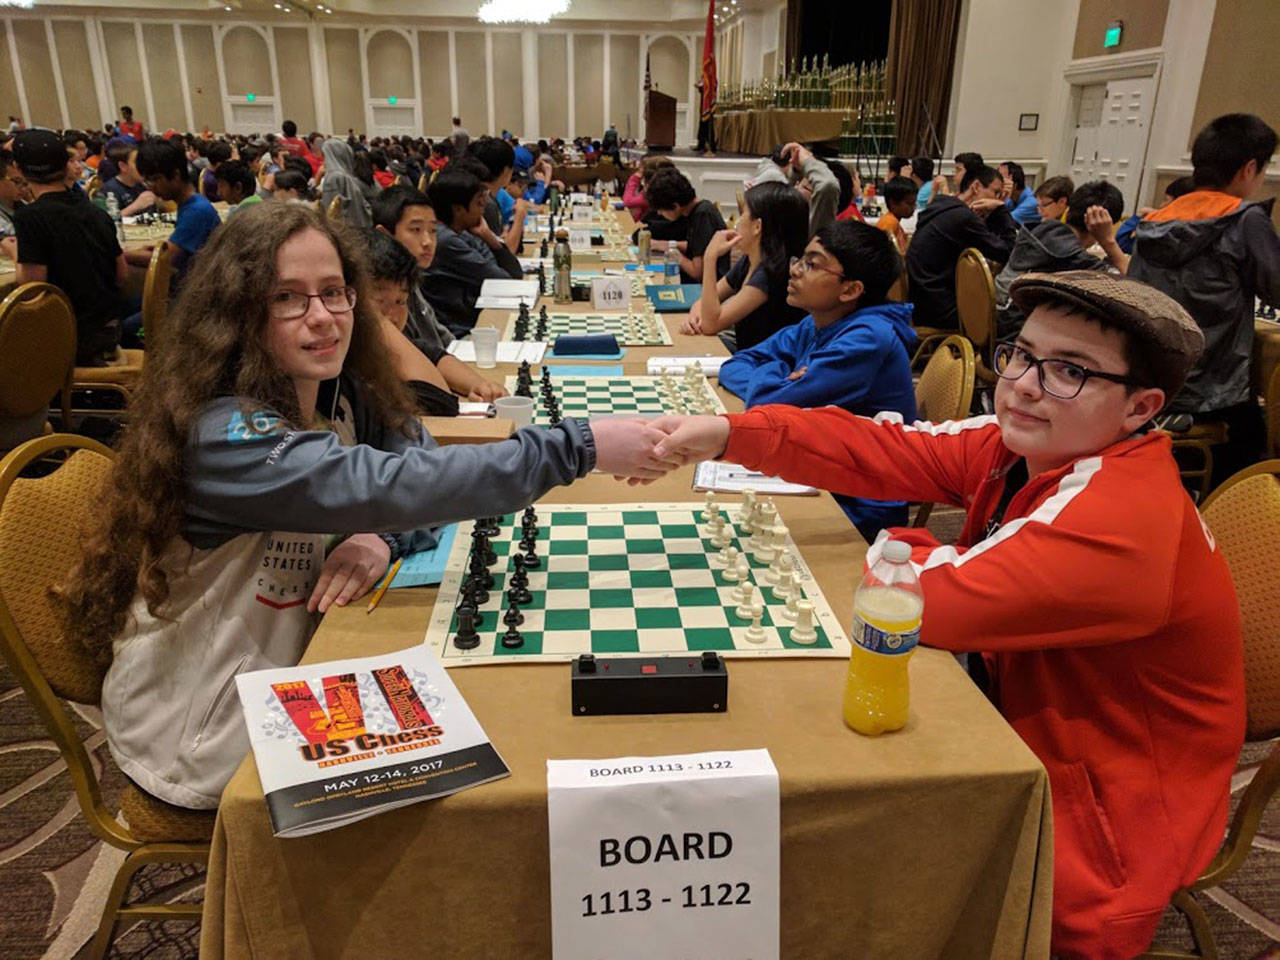 World champion chess player and Bellevue resident Naomi Bashkansky (left) shakes hands with an opponent at a chess tournament in Nashville, Tennessee, last weekend. She will be coming to the island Saturday to speak to Chautauqua Elementary School’s chess club and play against willing opponents. (Ludmila Bashkansky Photo)